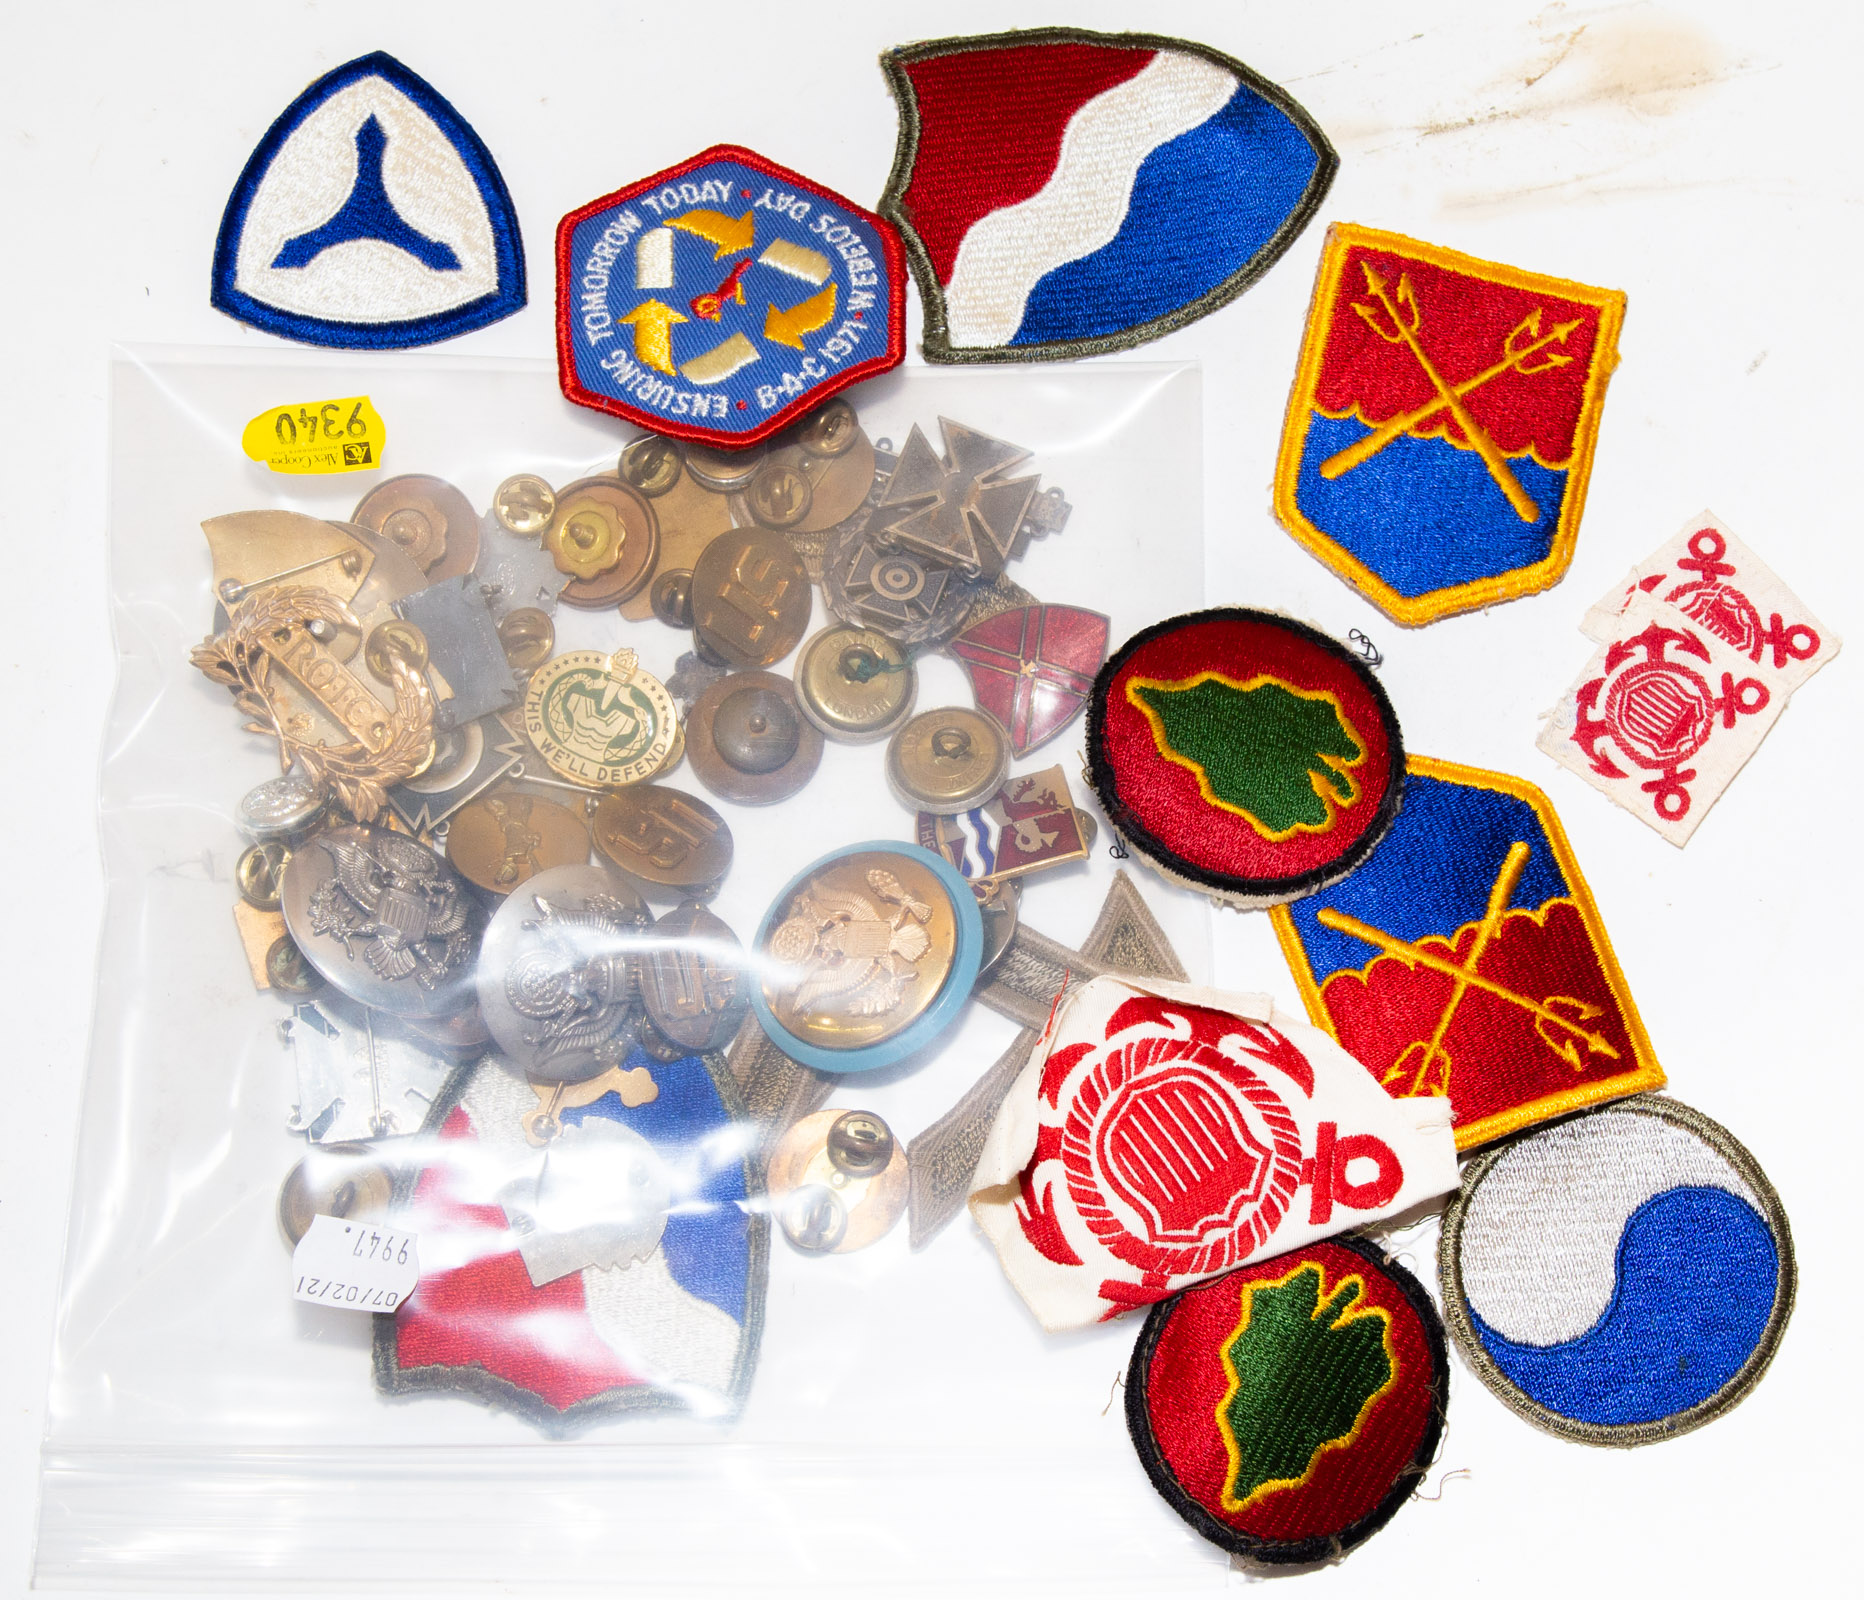 GROUP OF MILITARY BADGES & PATCHES